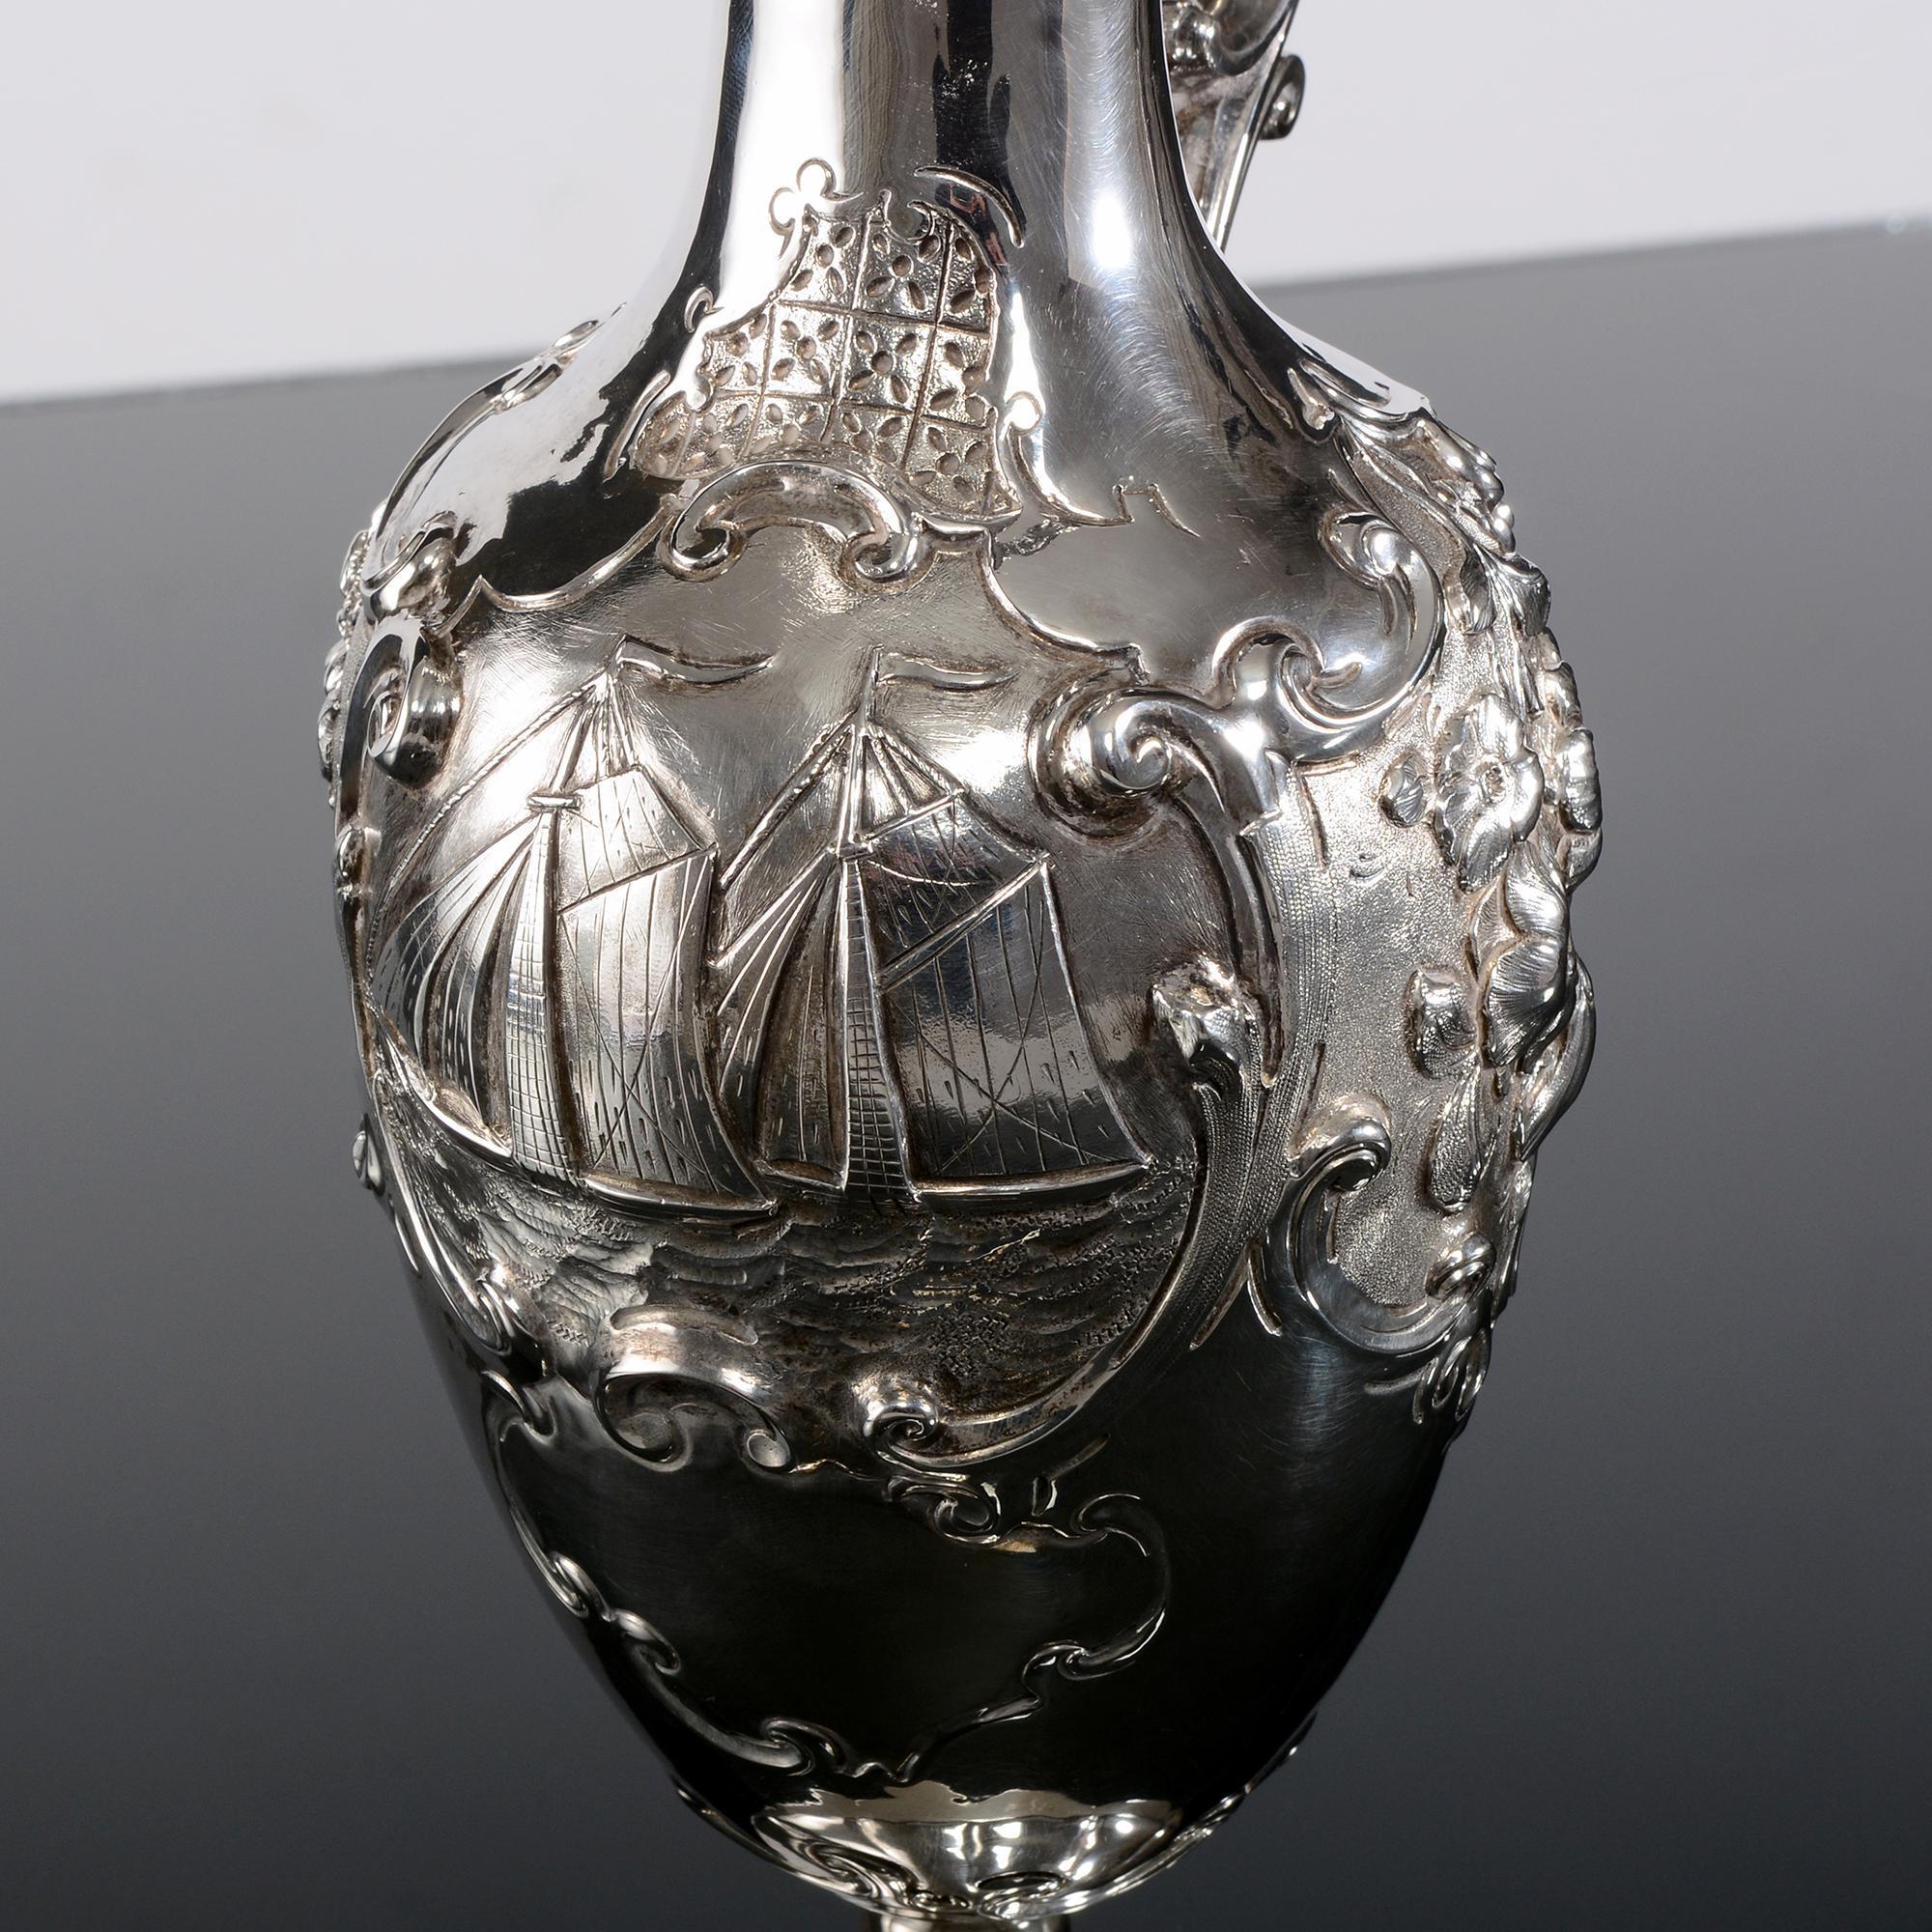 This wonderful Victorian wine ewer is elaborately hand-chased with scroll-framed floral detail on either side of the body and a beautifully detailed sailing scene of two racing yachts. This antique silver jug has a melon style lobed foot, a cast